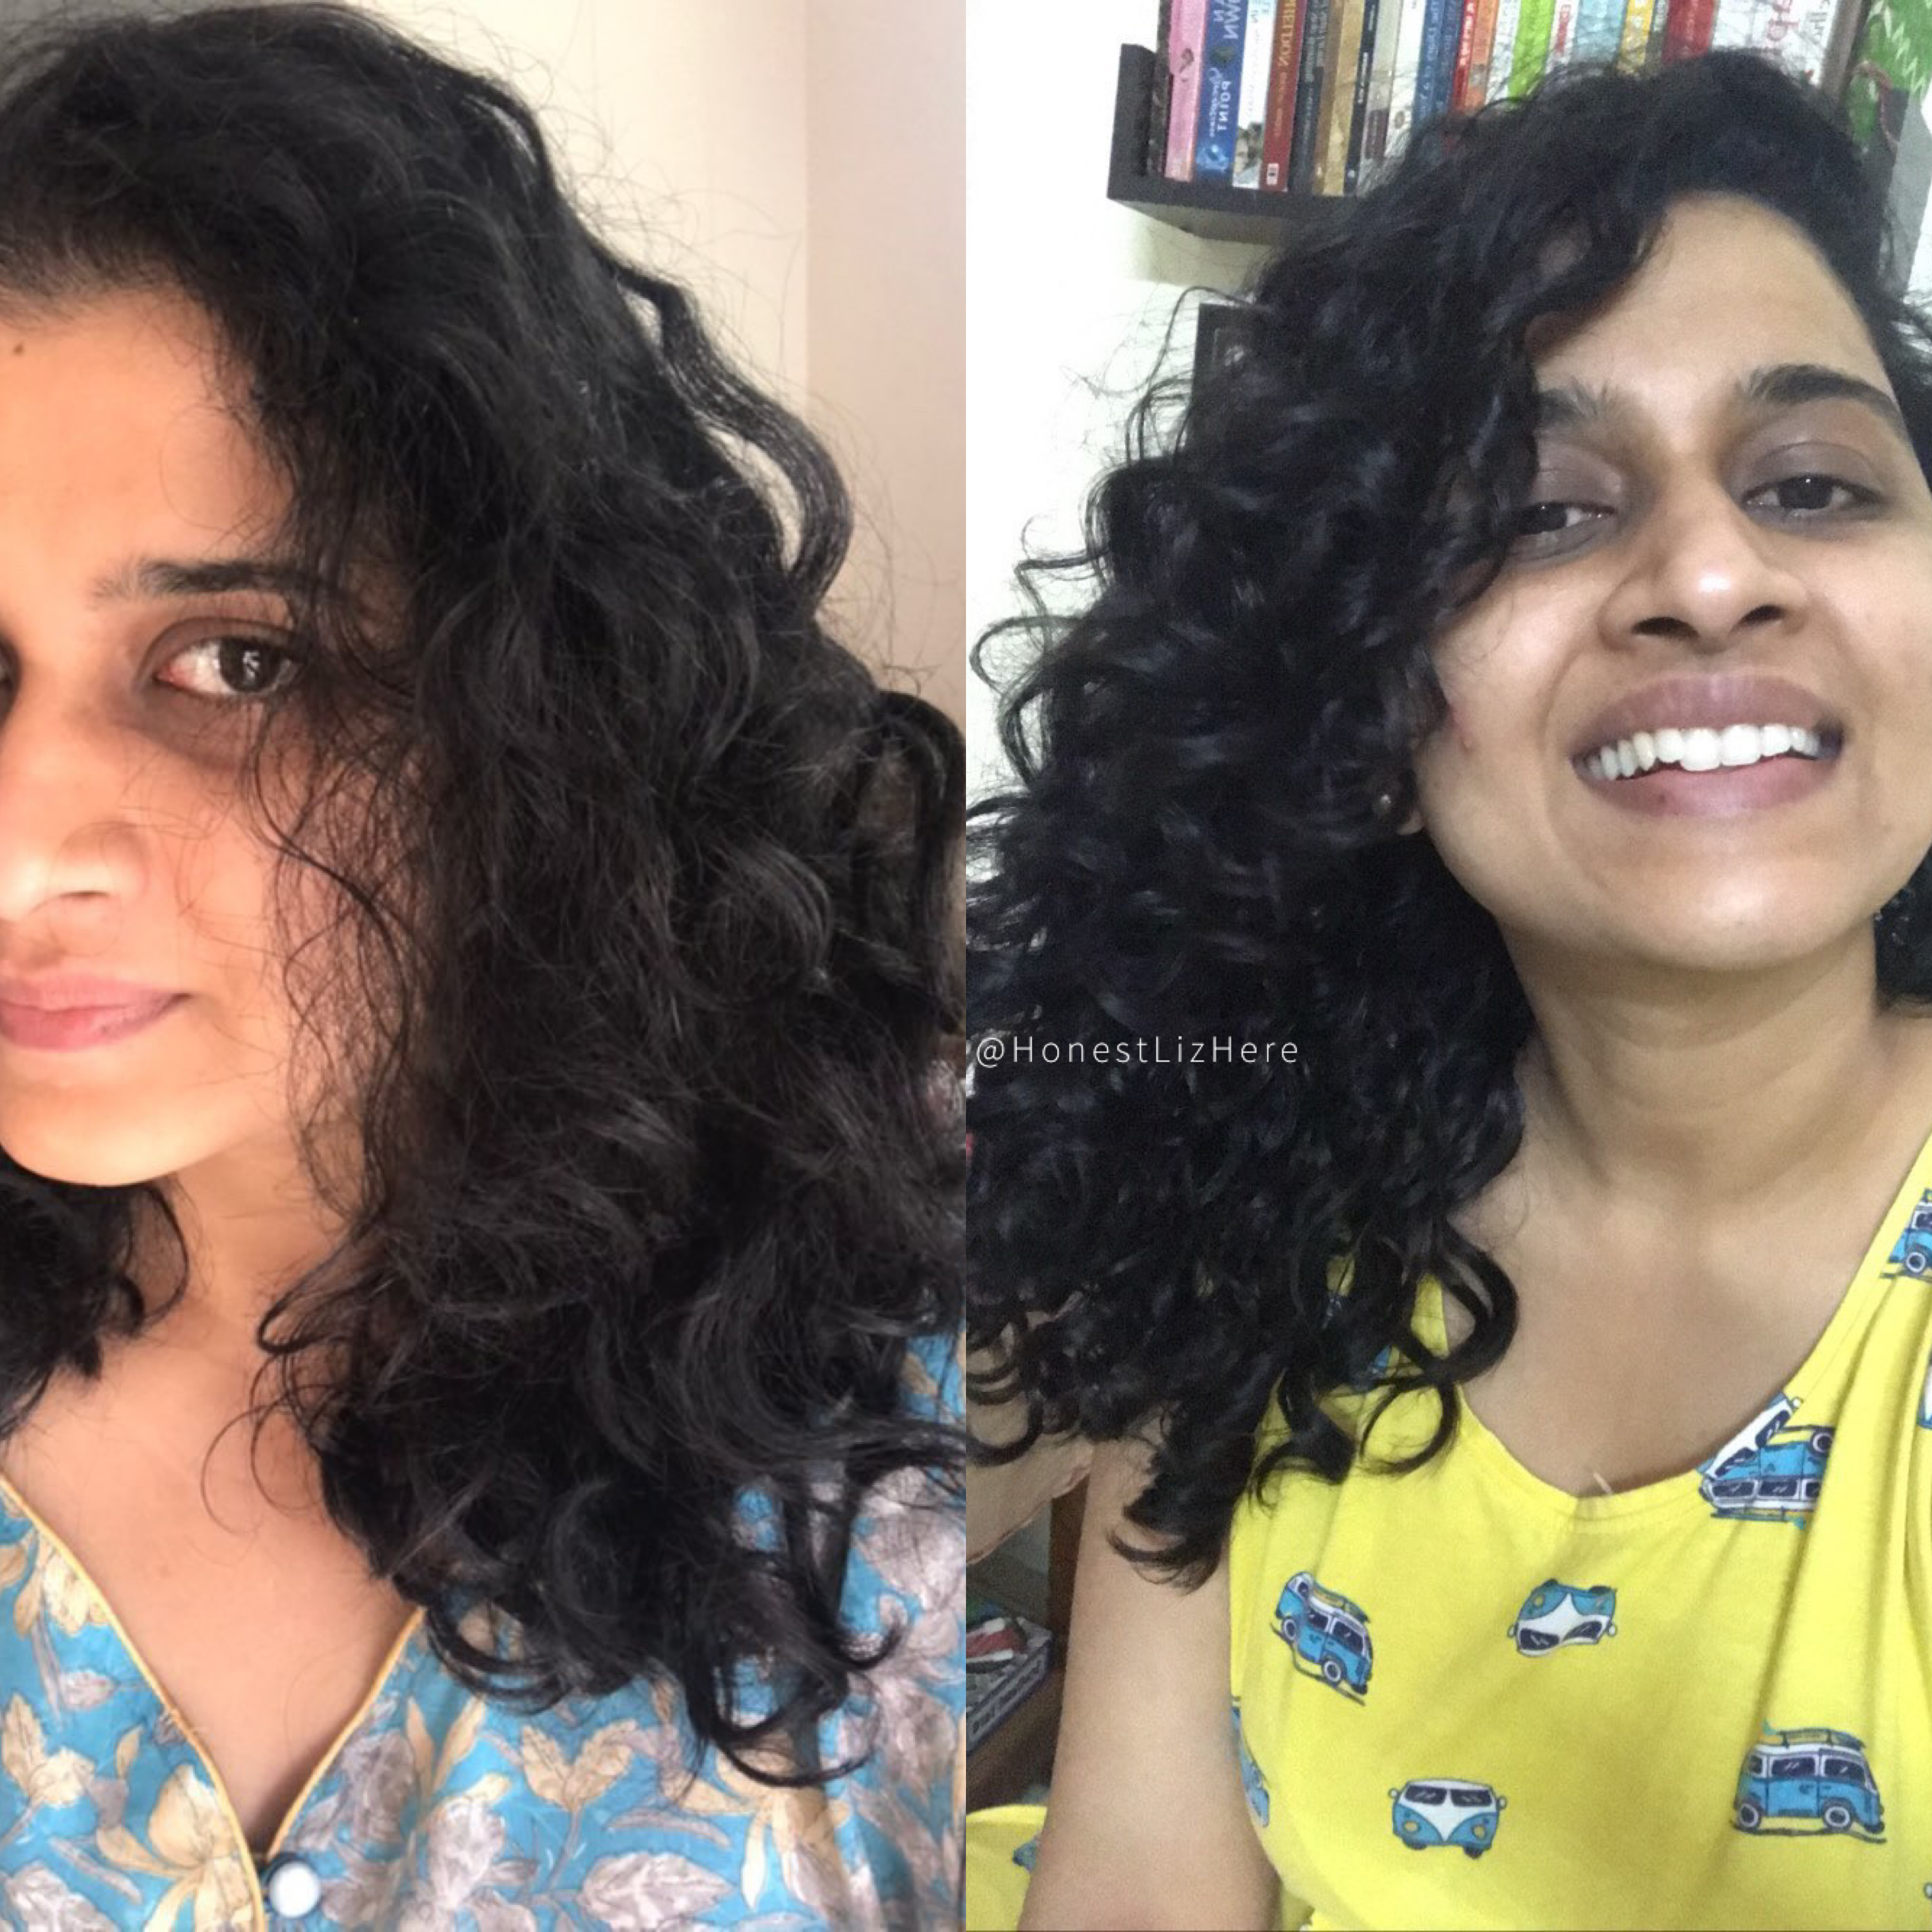 curly hair transformation,  How long does curly hair transition take? How can I change my straight hair to curly permanently? How can I change my hair to curly naturally? How long does it take to train your hair to be curly? HONESTLIZ COACHING, CURL COACHING